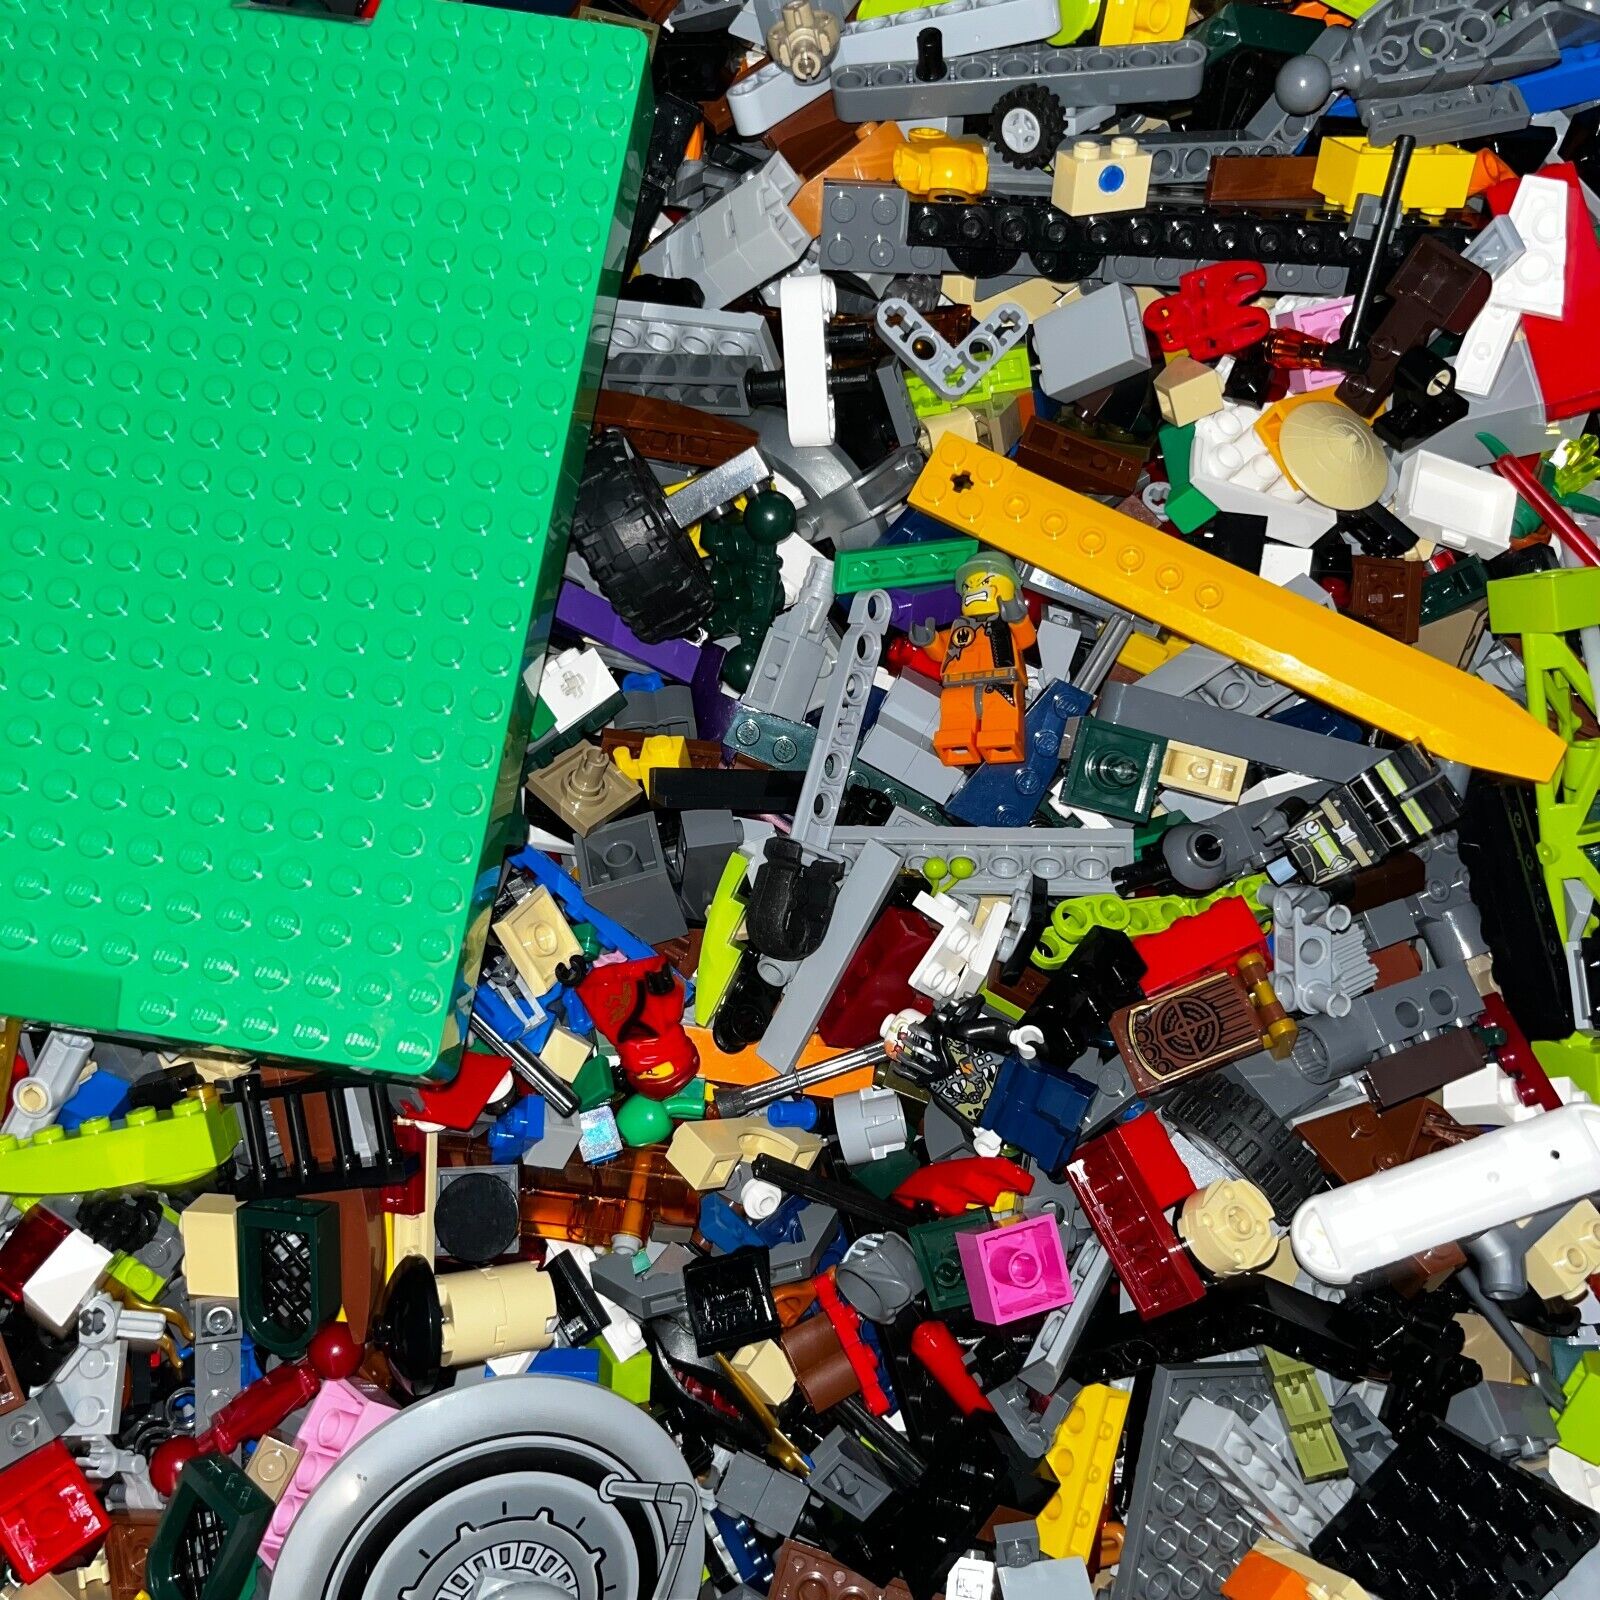 1lbs Each Order - Lego by the Pound Misc Pieces, Volume Discount - By Weight